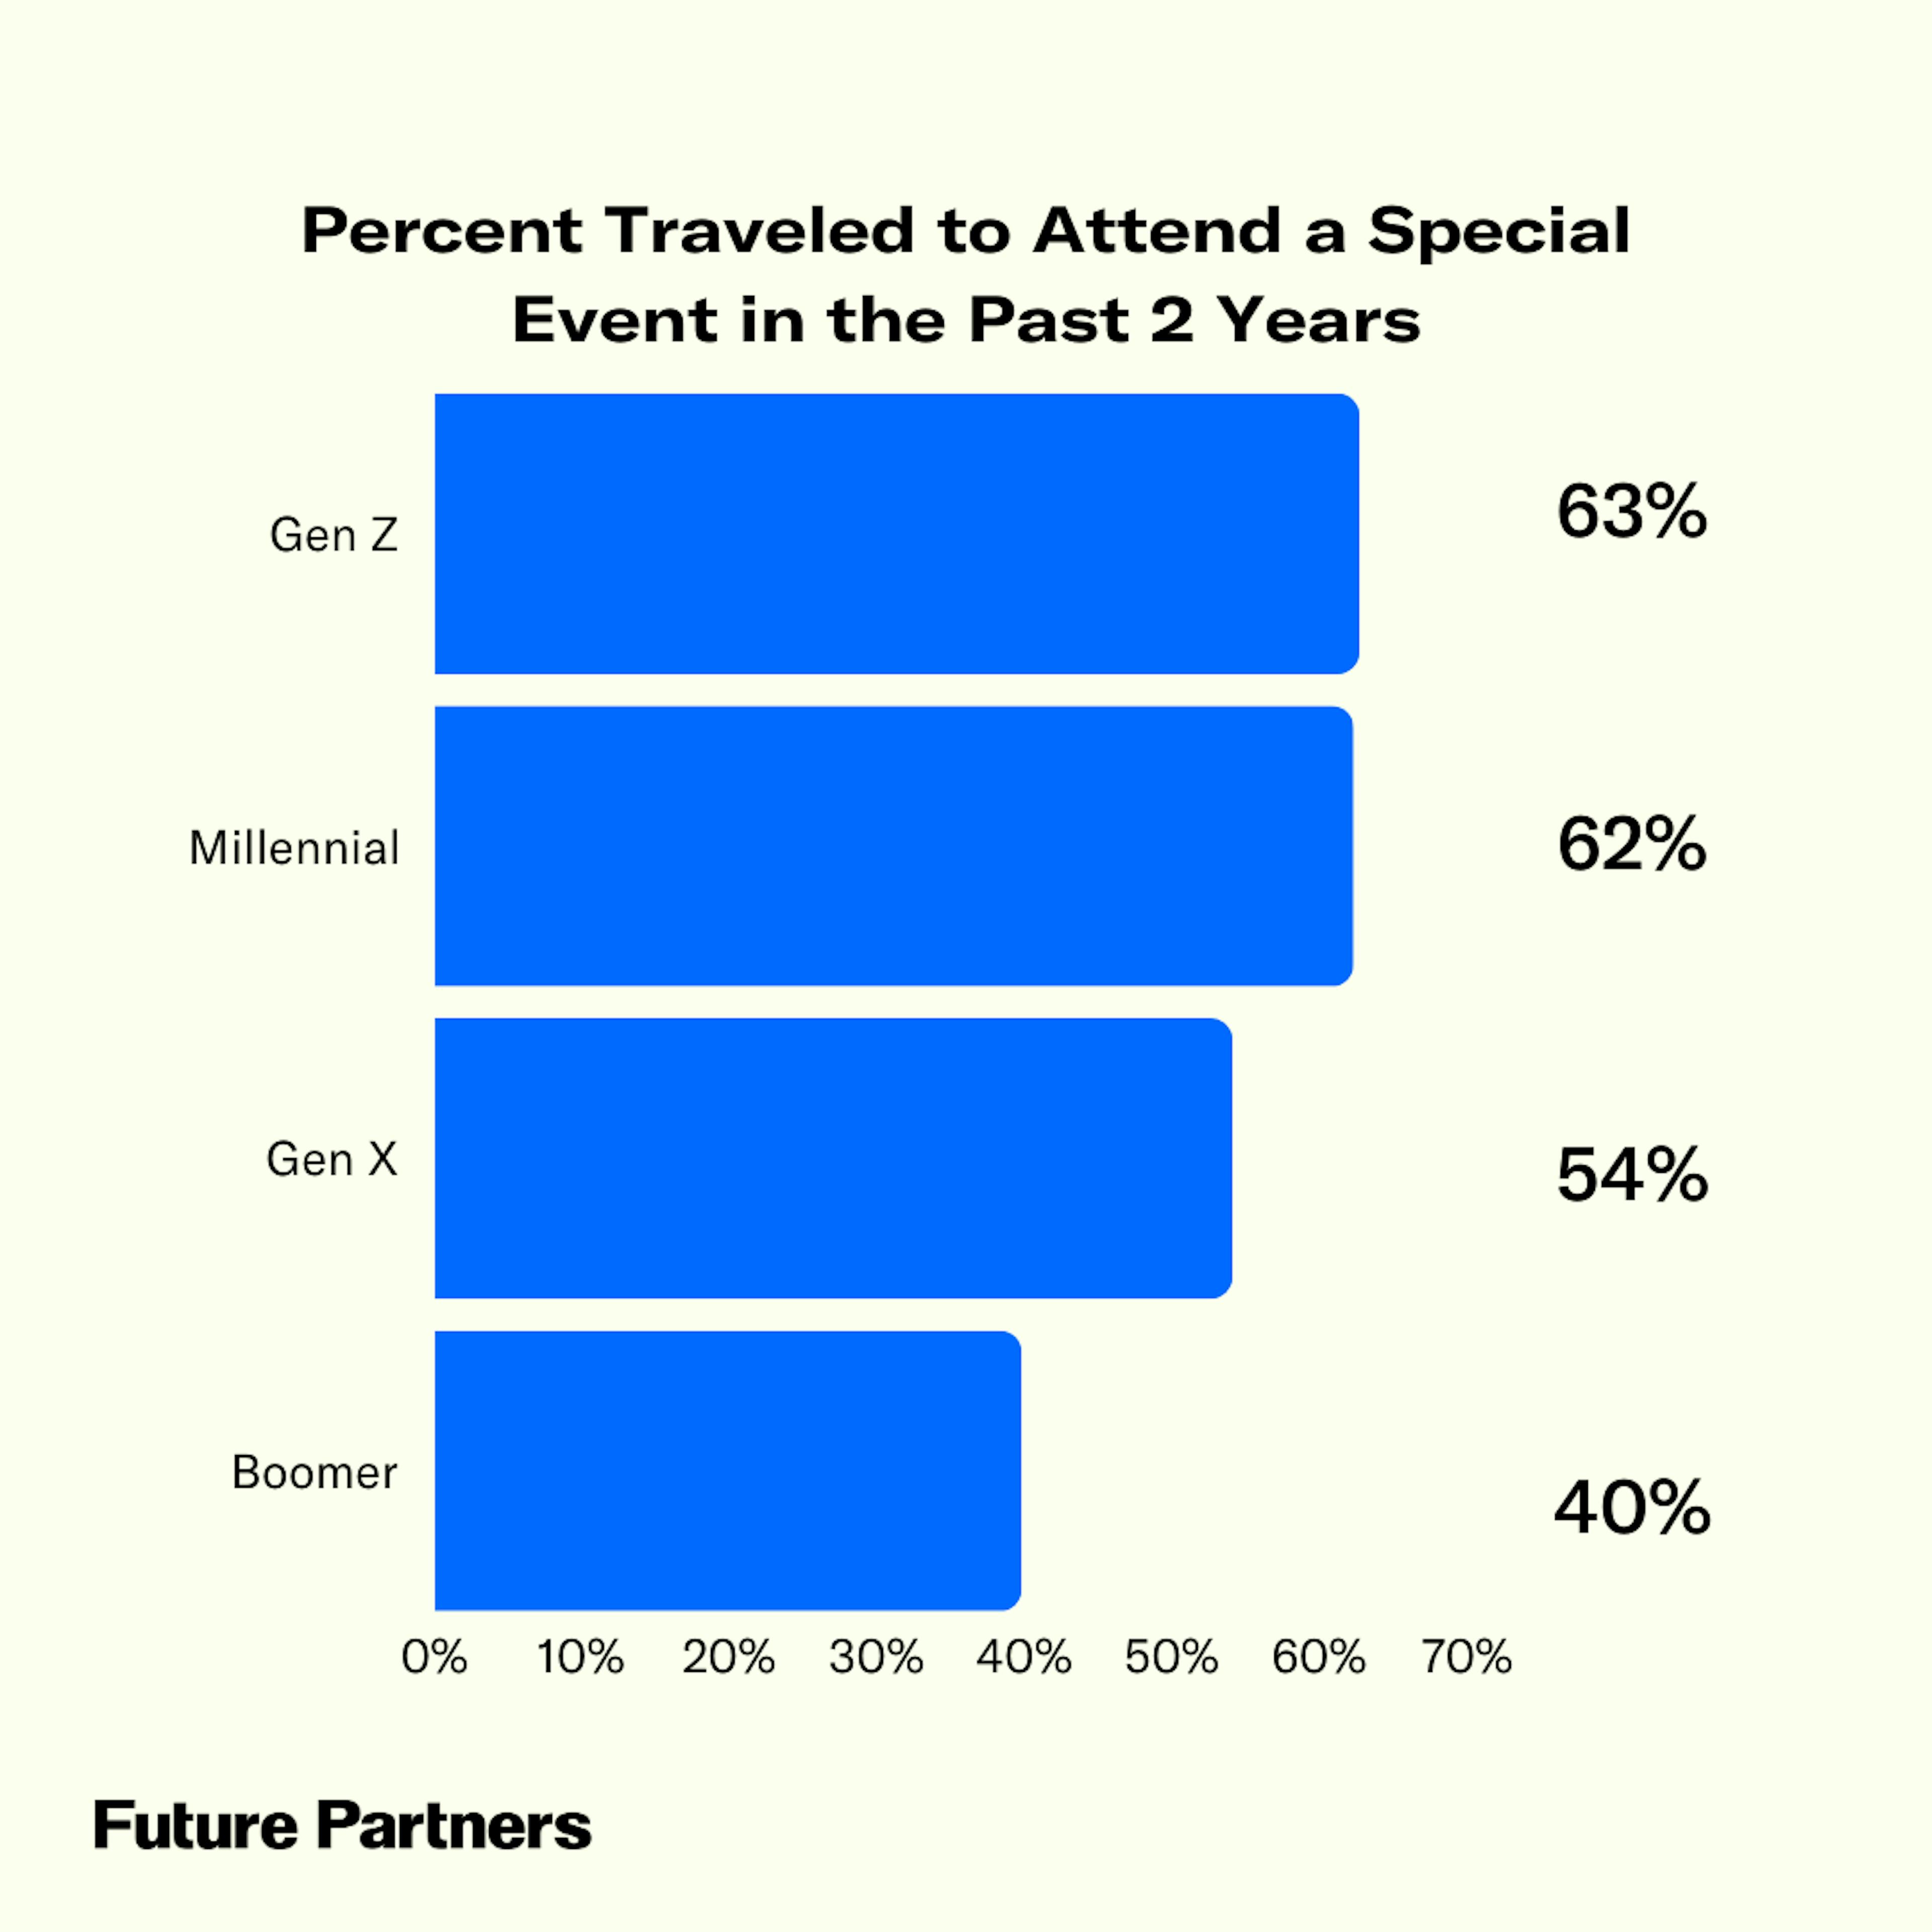 Gen Z are the most likely to travel for a special event, followed closely by Millennials.